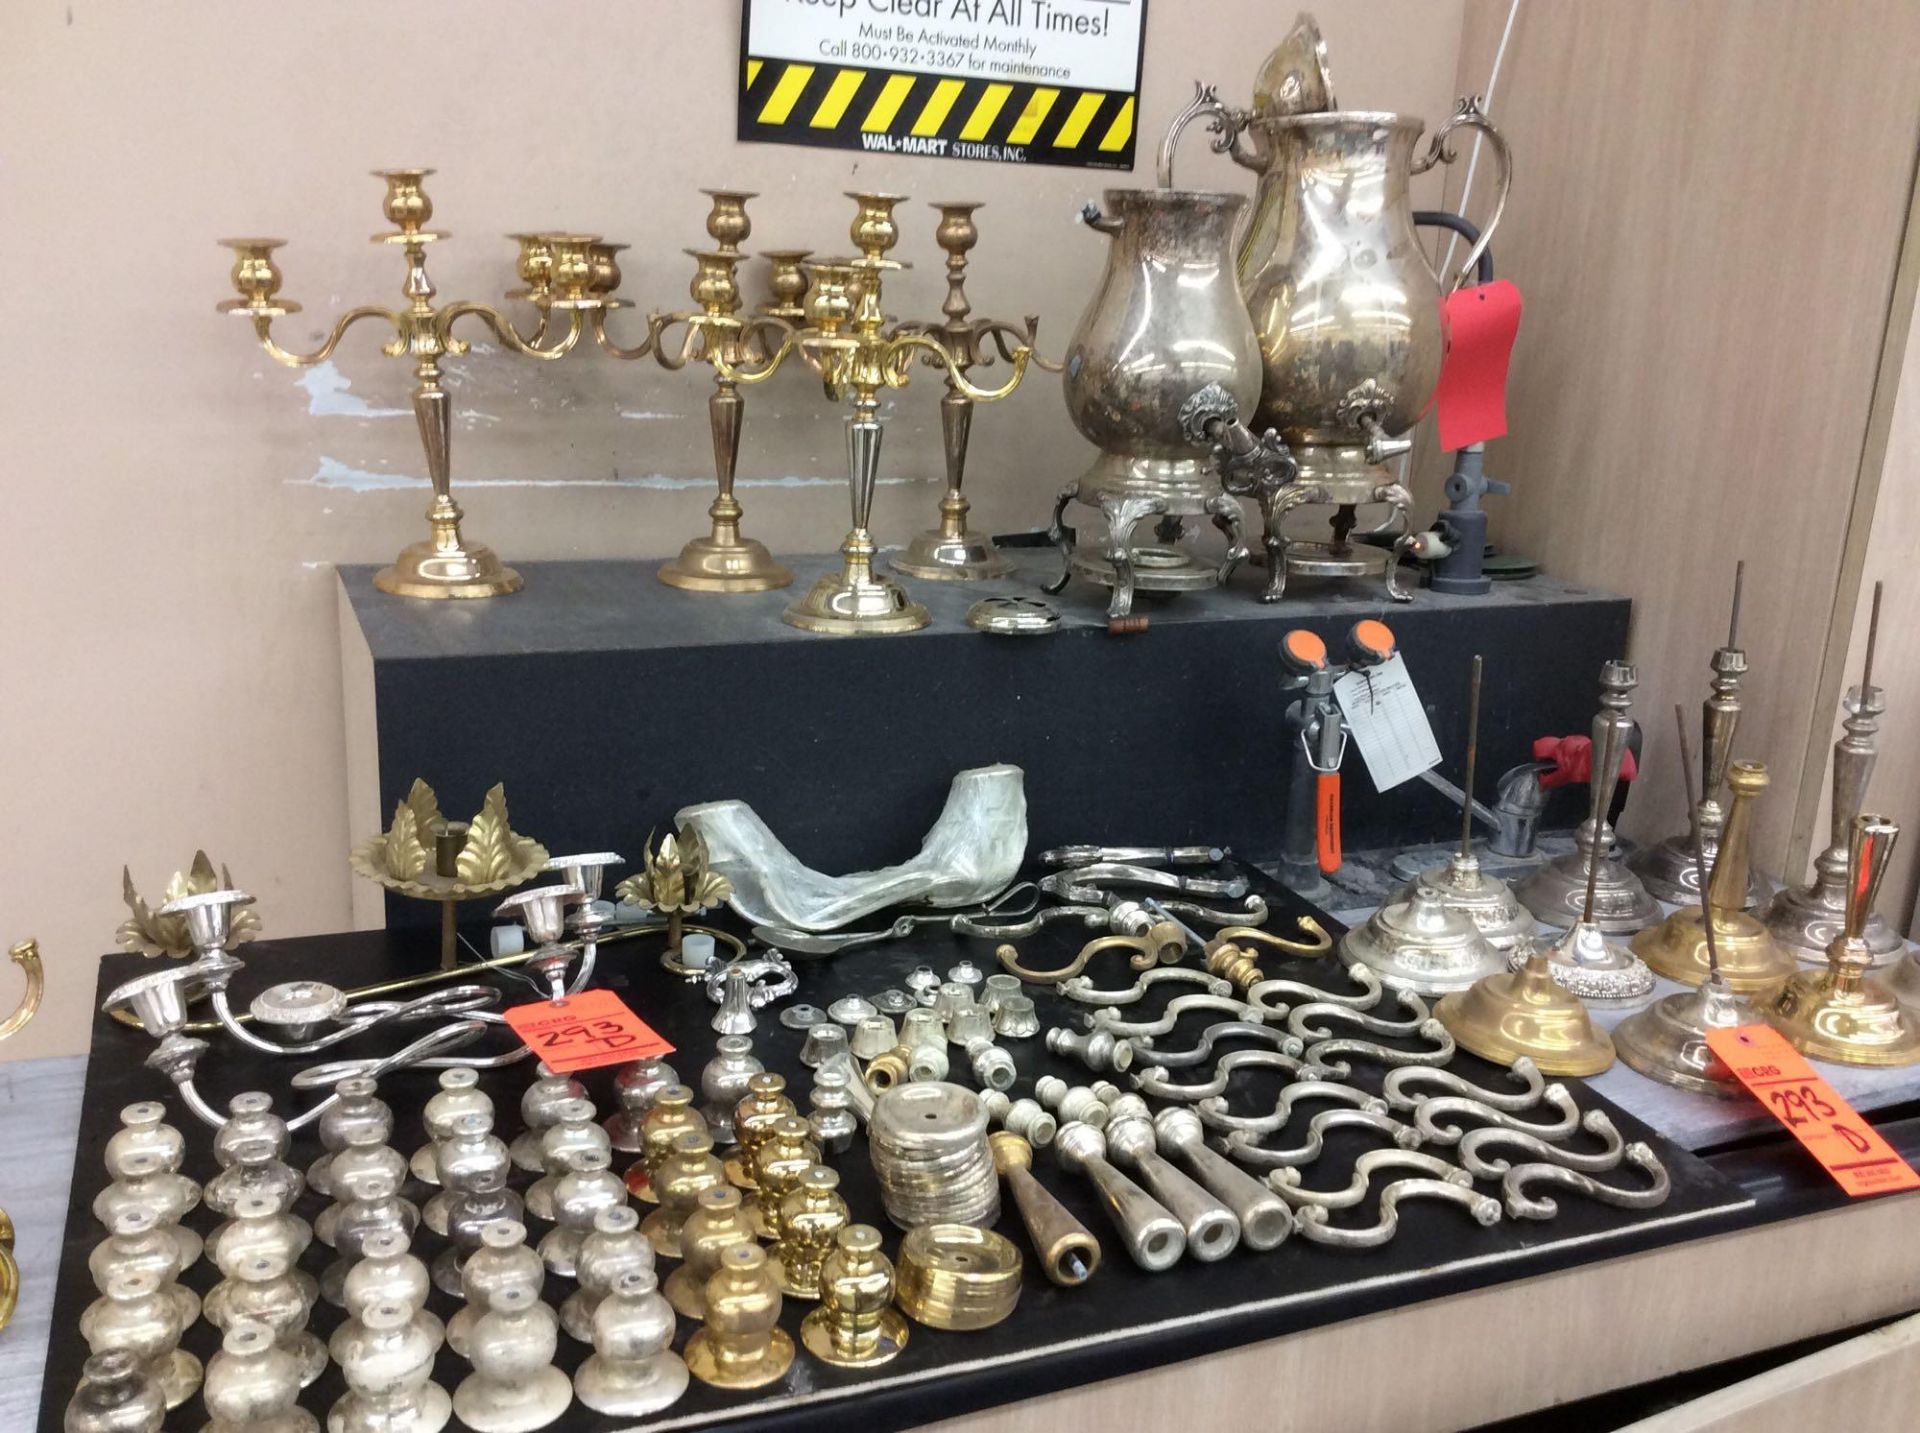 Lot of asst candelabra and candle holder parts, most silver-plated - and (2) silver-plated coffee